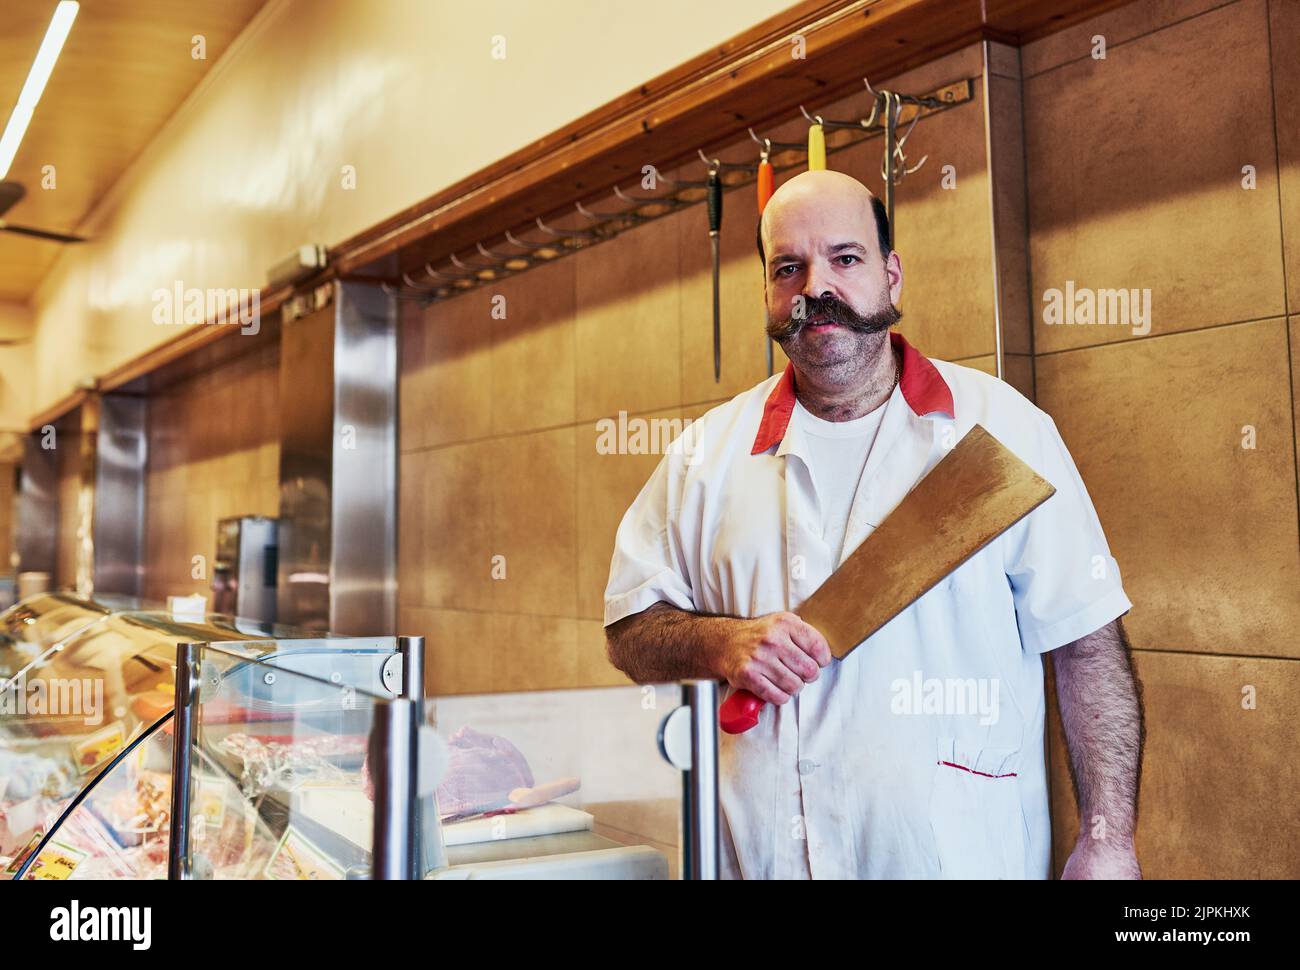 Ive got what I need to start the working day. a butcher at his store. Stock Photo